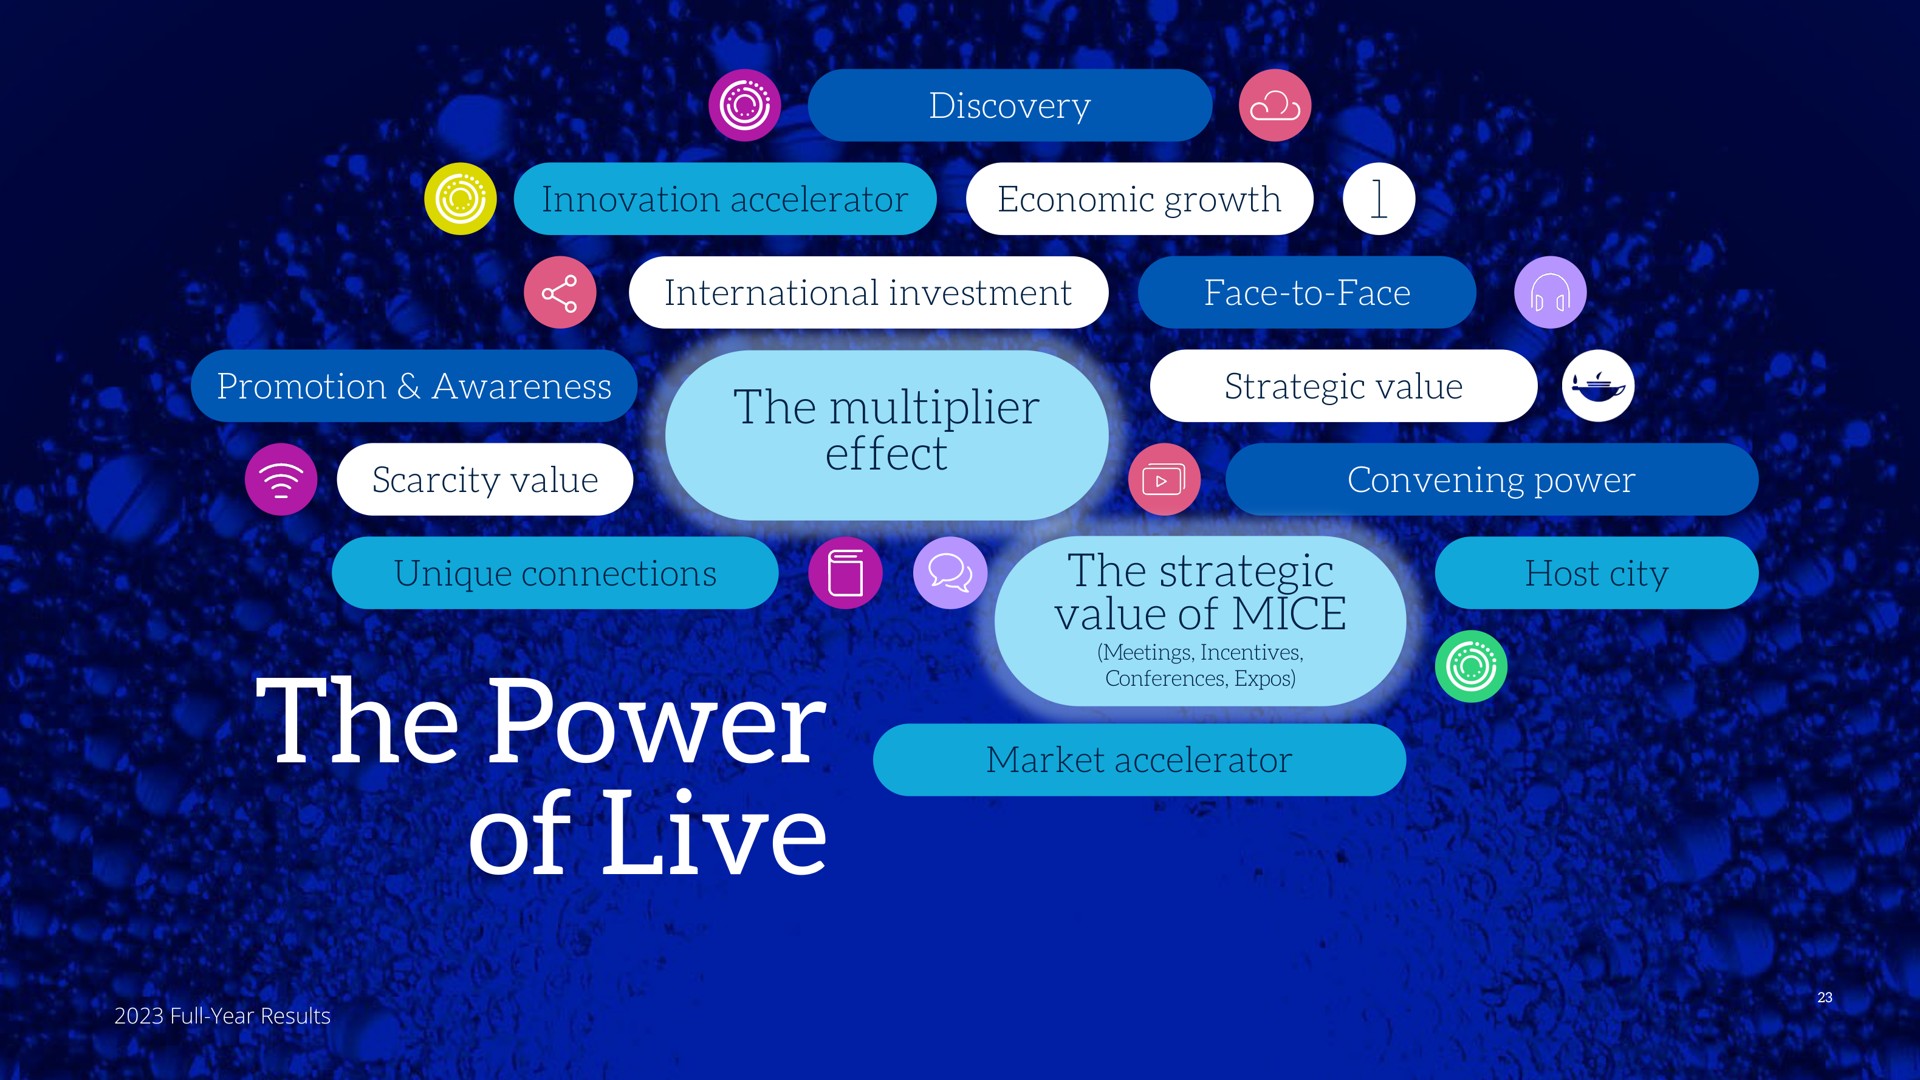 the power of live the multiplier effect the strategic value of mice host city | Informa